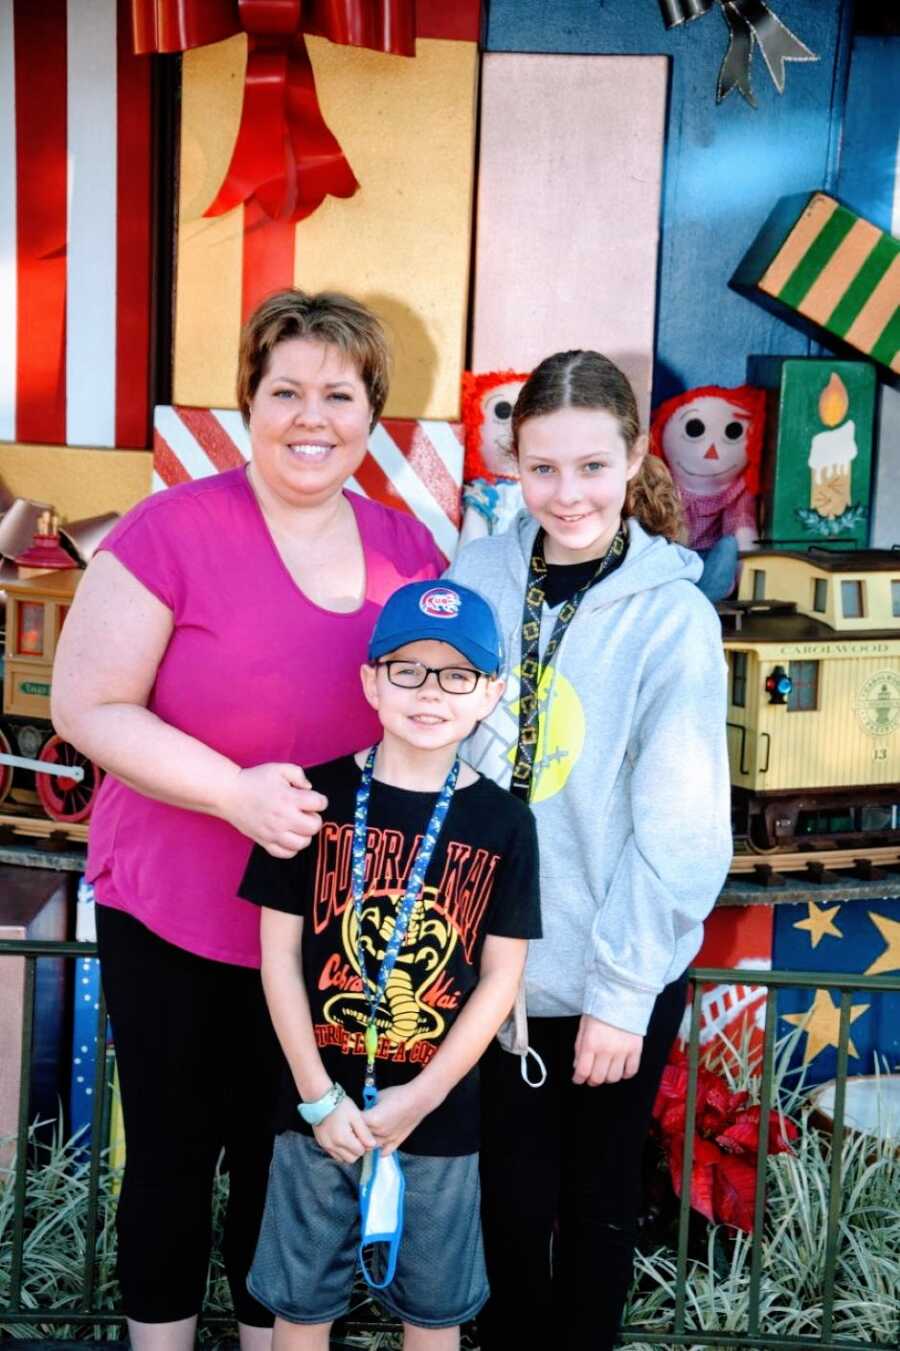 Mom takes a photo with her two children while at a theme park